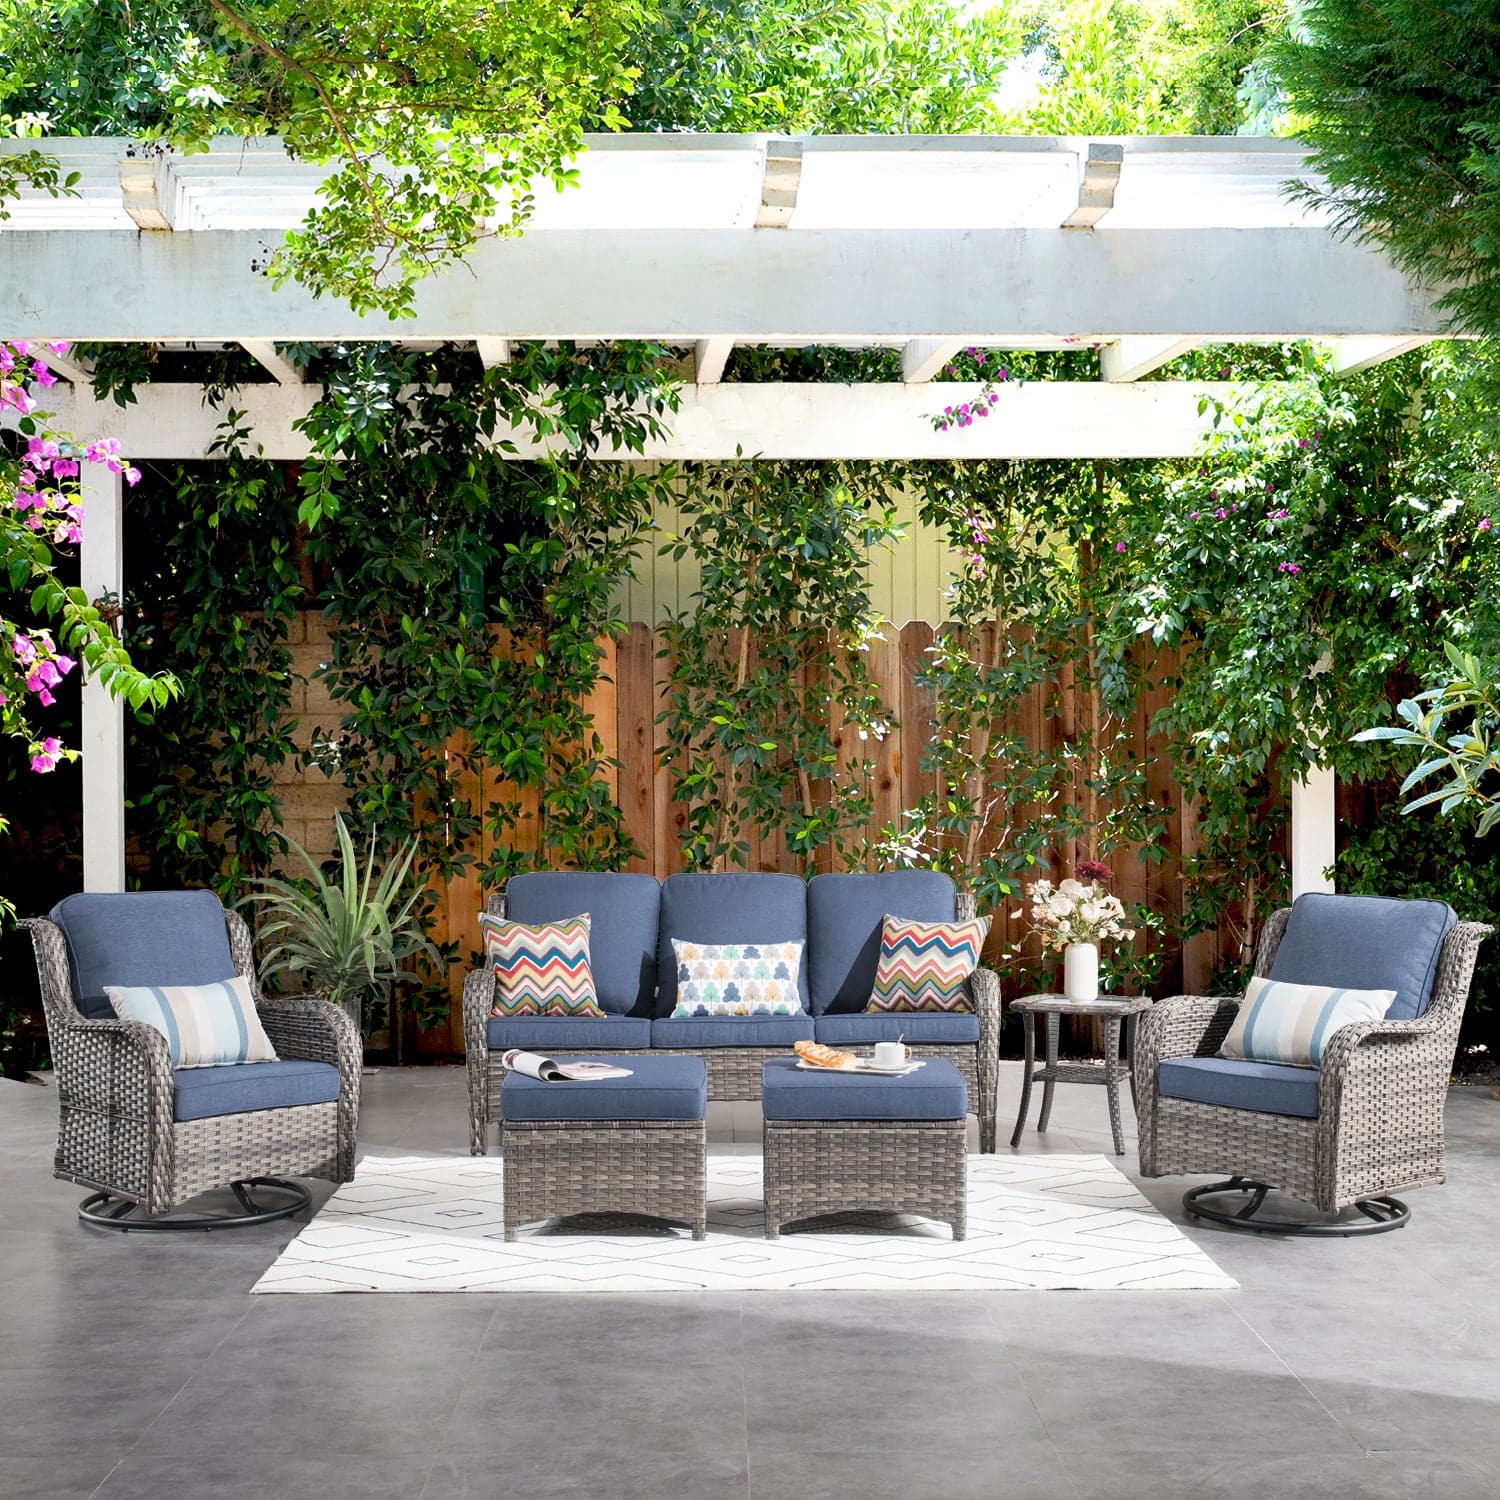 Tips for Keeping Bugs Away From Your Patio